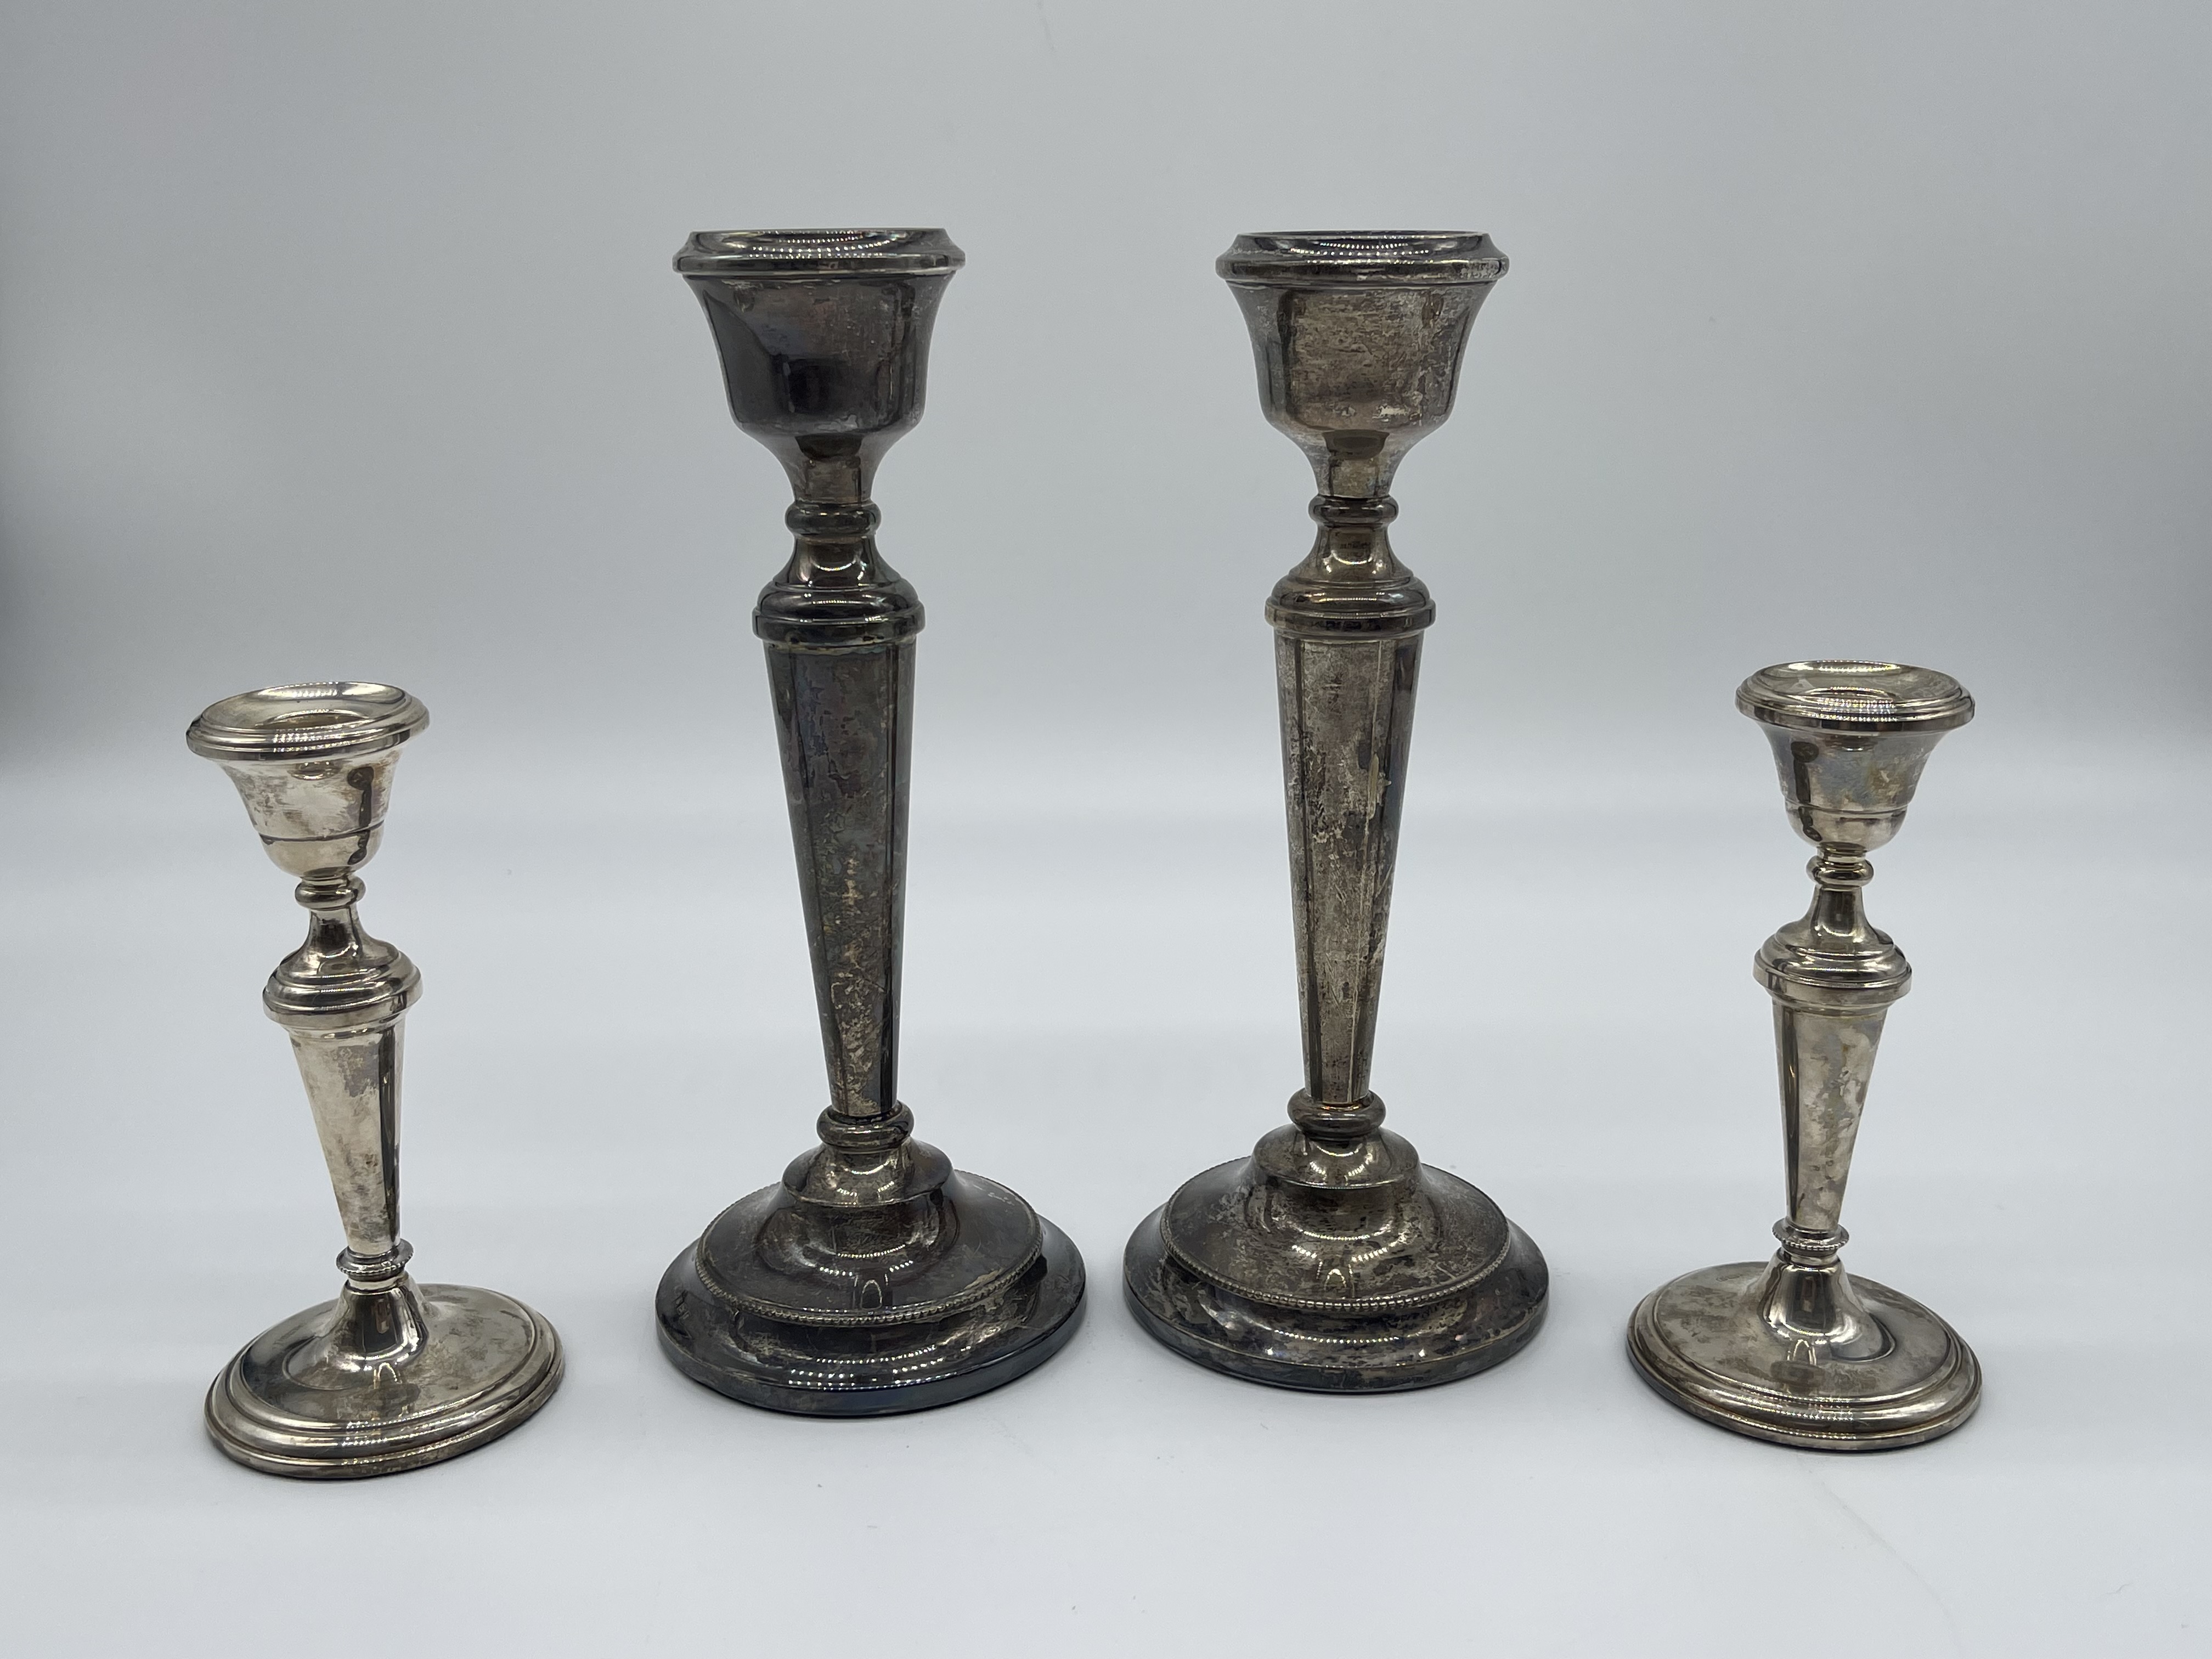 Two Pairs of HM Silver Candlesticks.